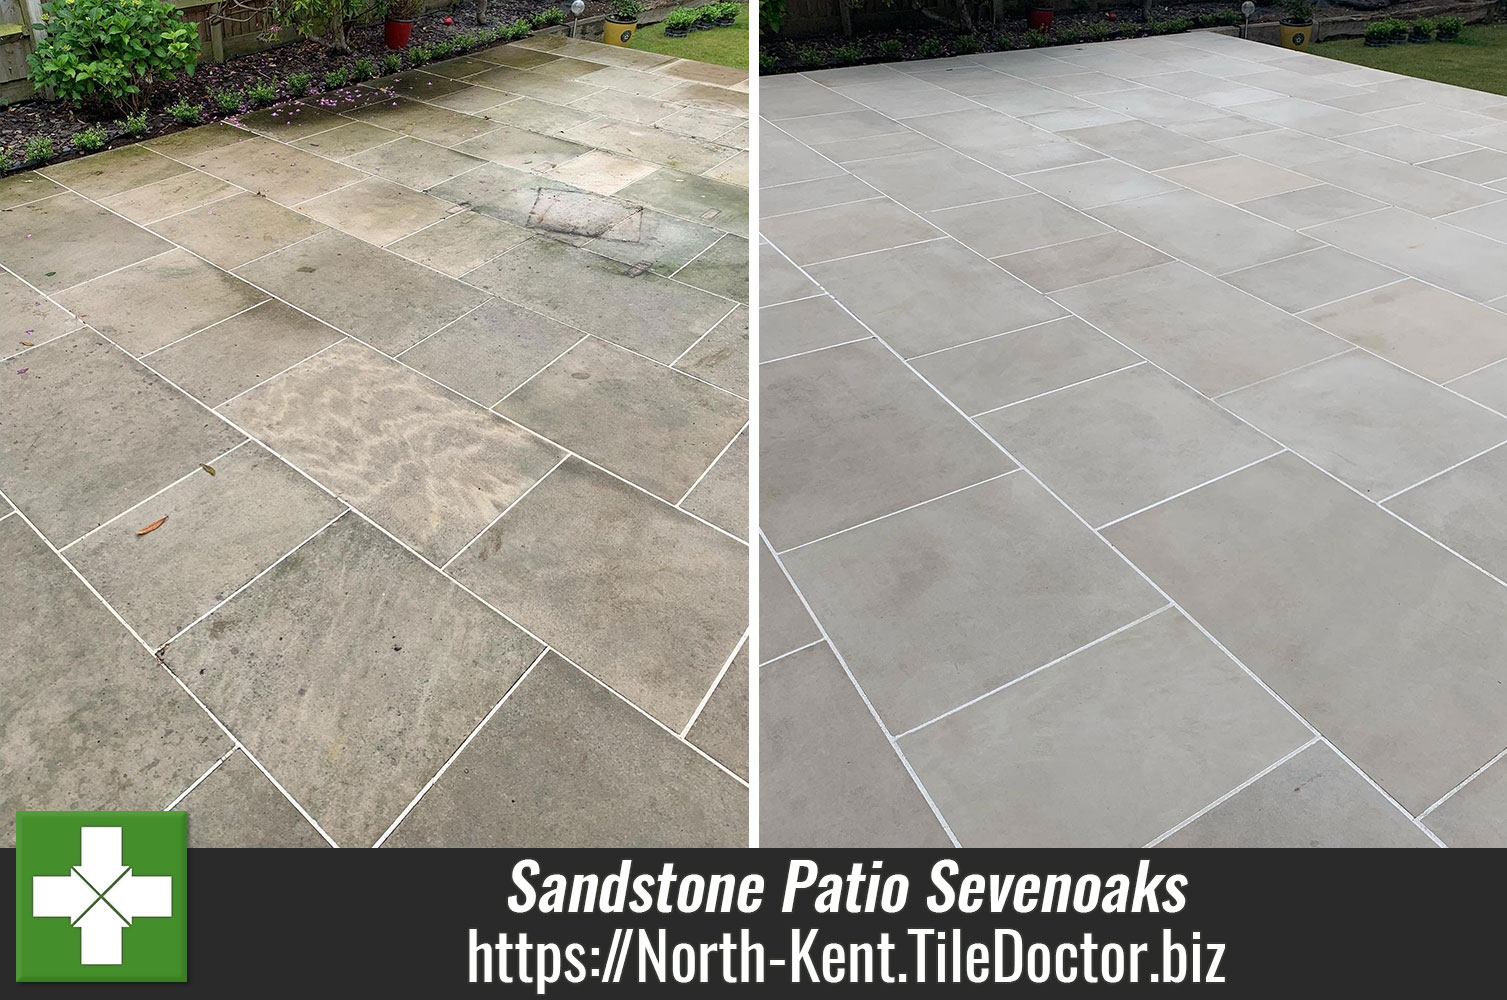 Deep Seated Stains Removed for Sevenoaks Patio using Tile Doctor Brick Driveway and Patio Cleaner